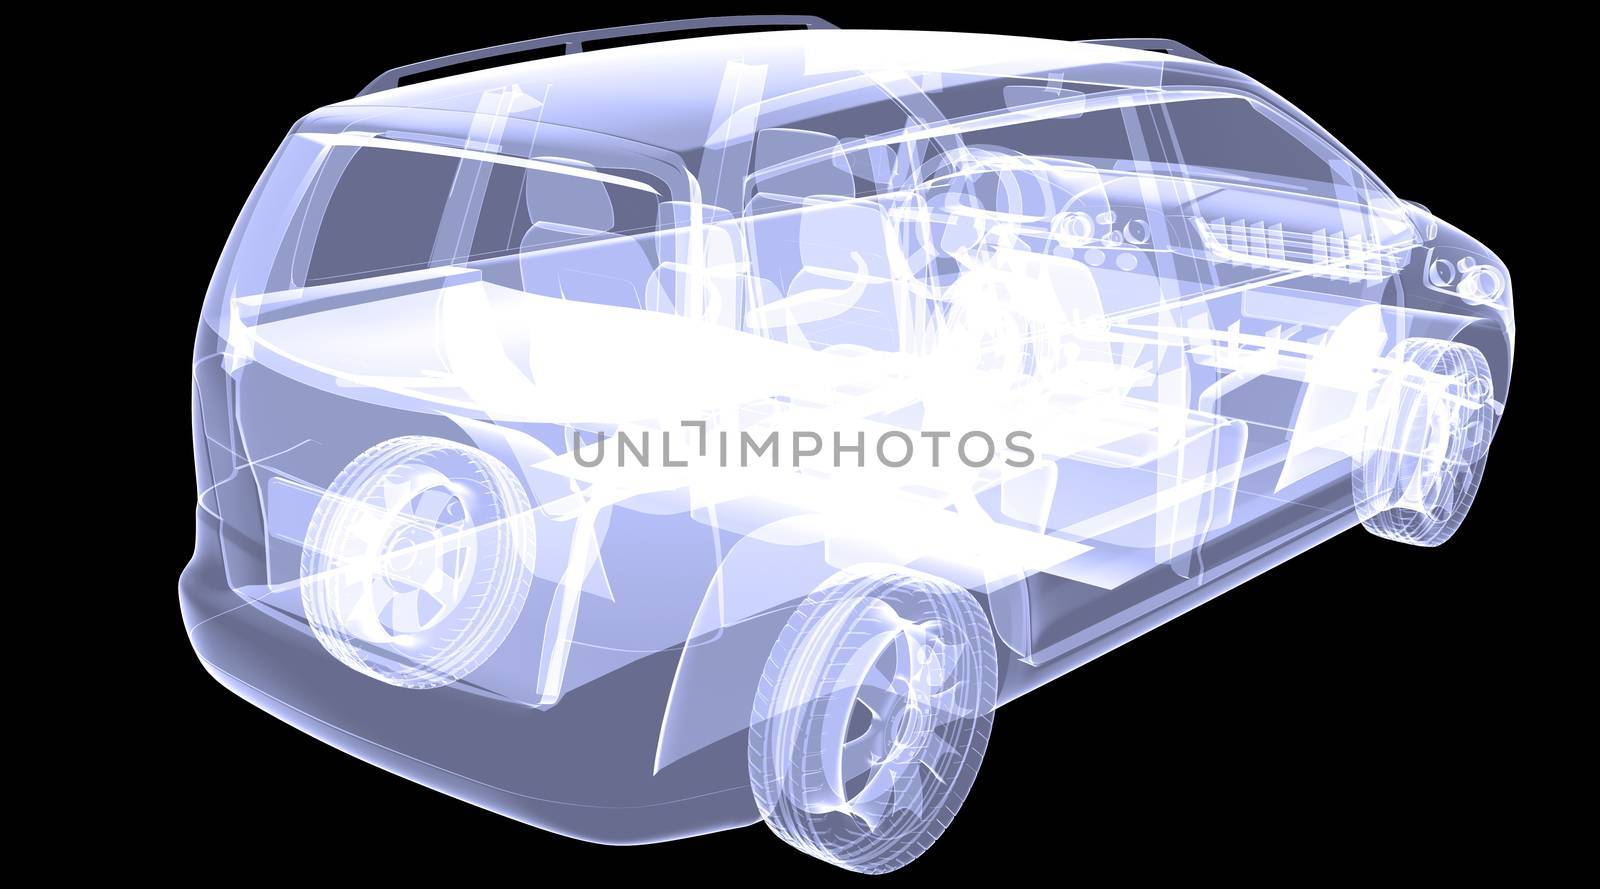 X-ray concept car by cherezoff